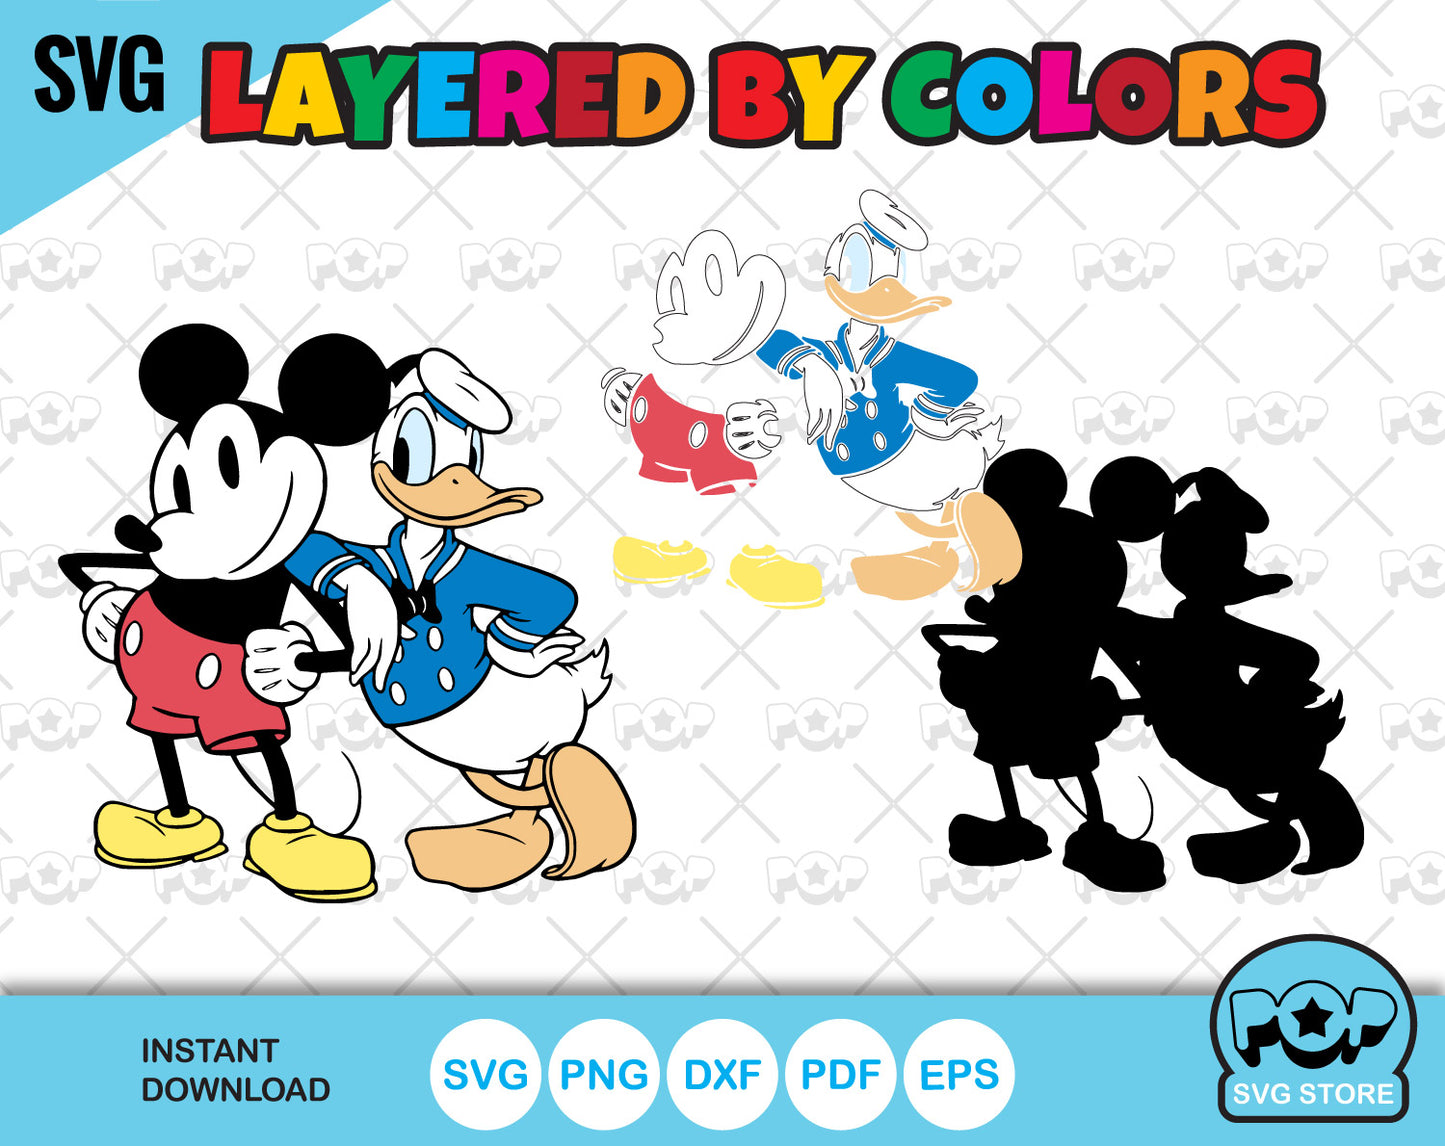 Classic Mickey and Friends 100 cliparts bundle, svg cut files for Cricut / Silhouette, Mickey & friends png